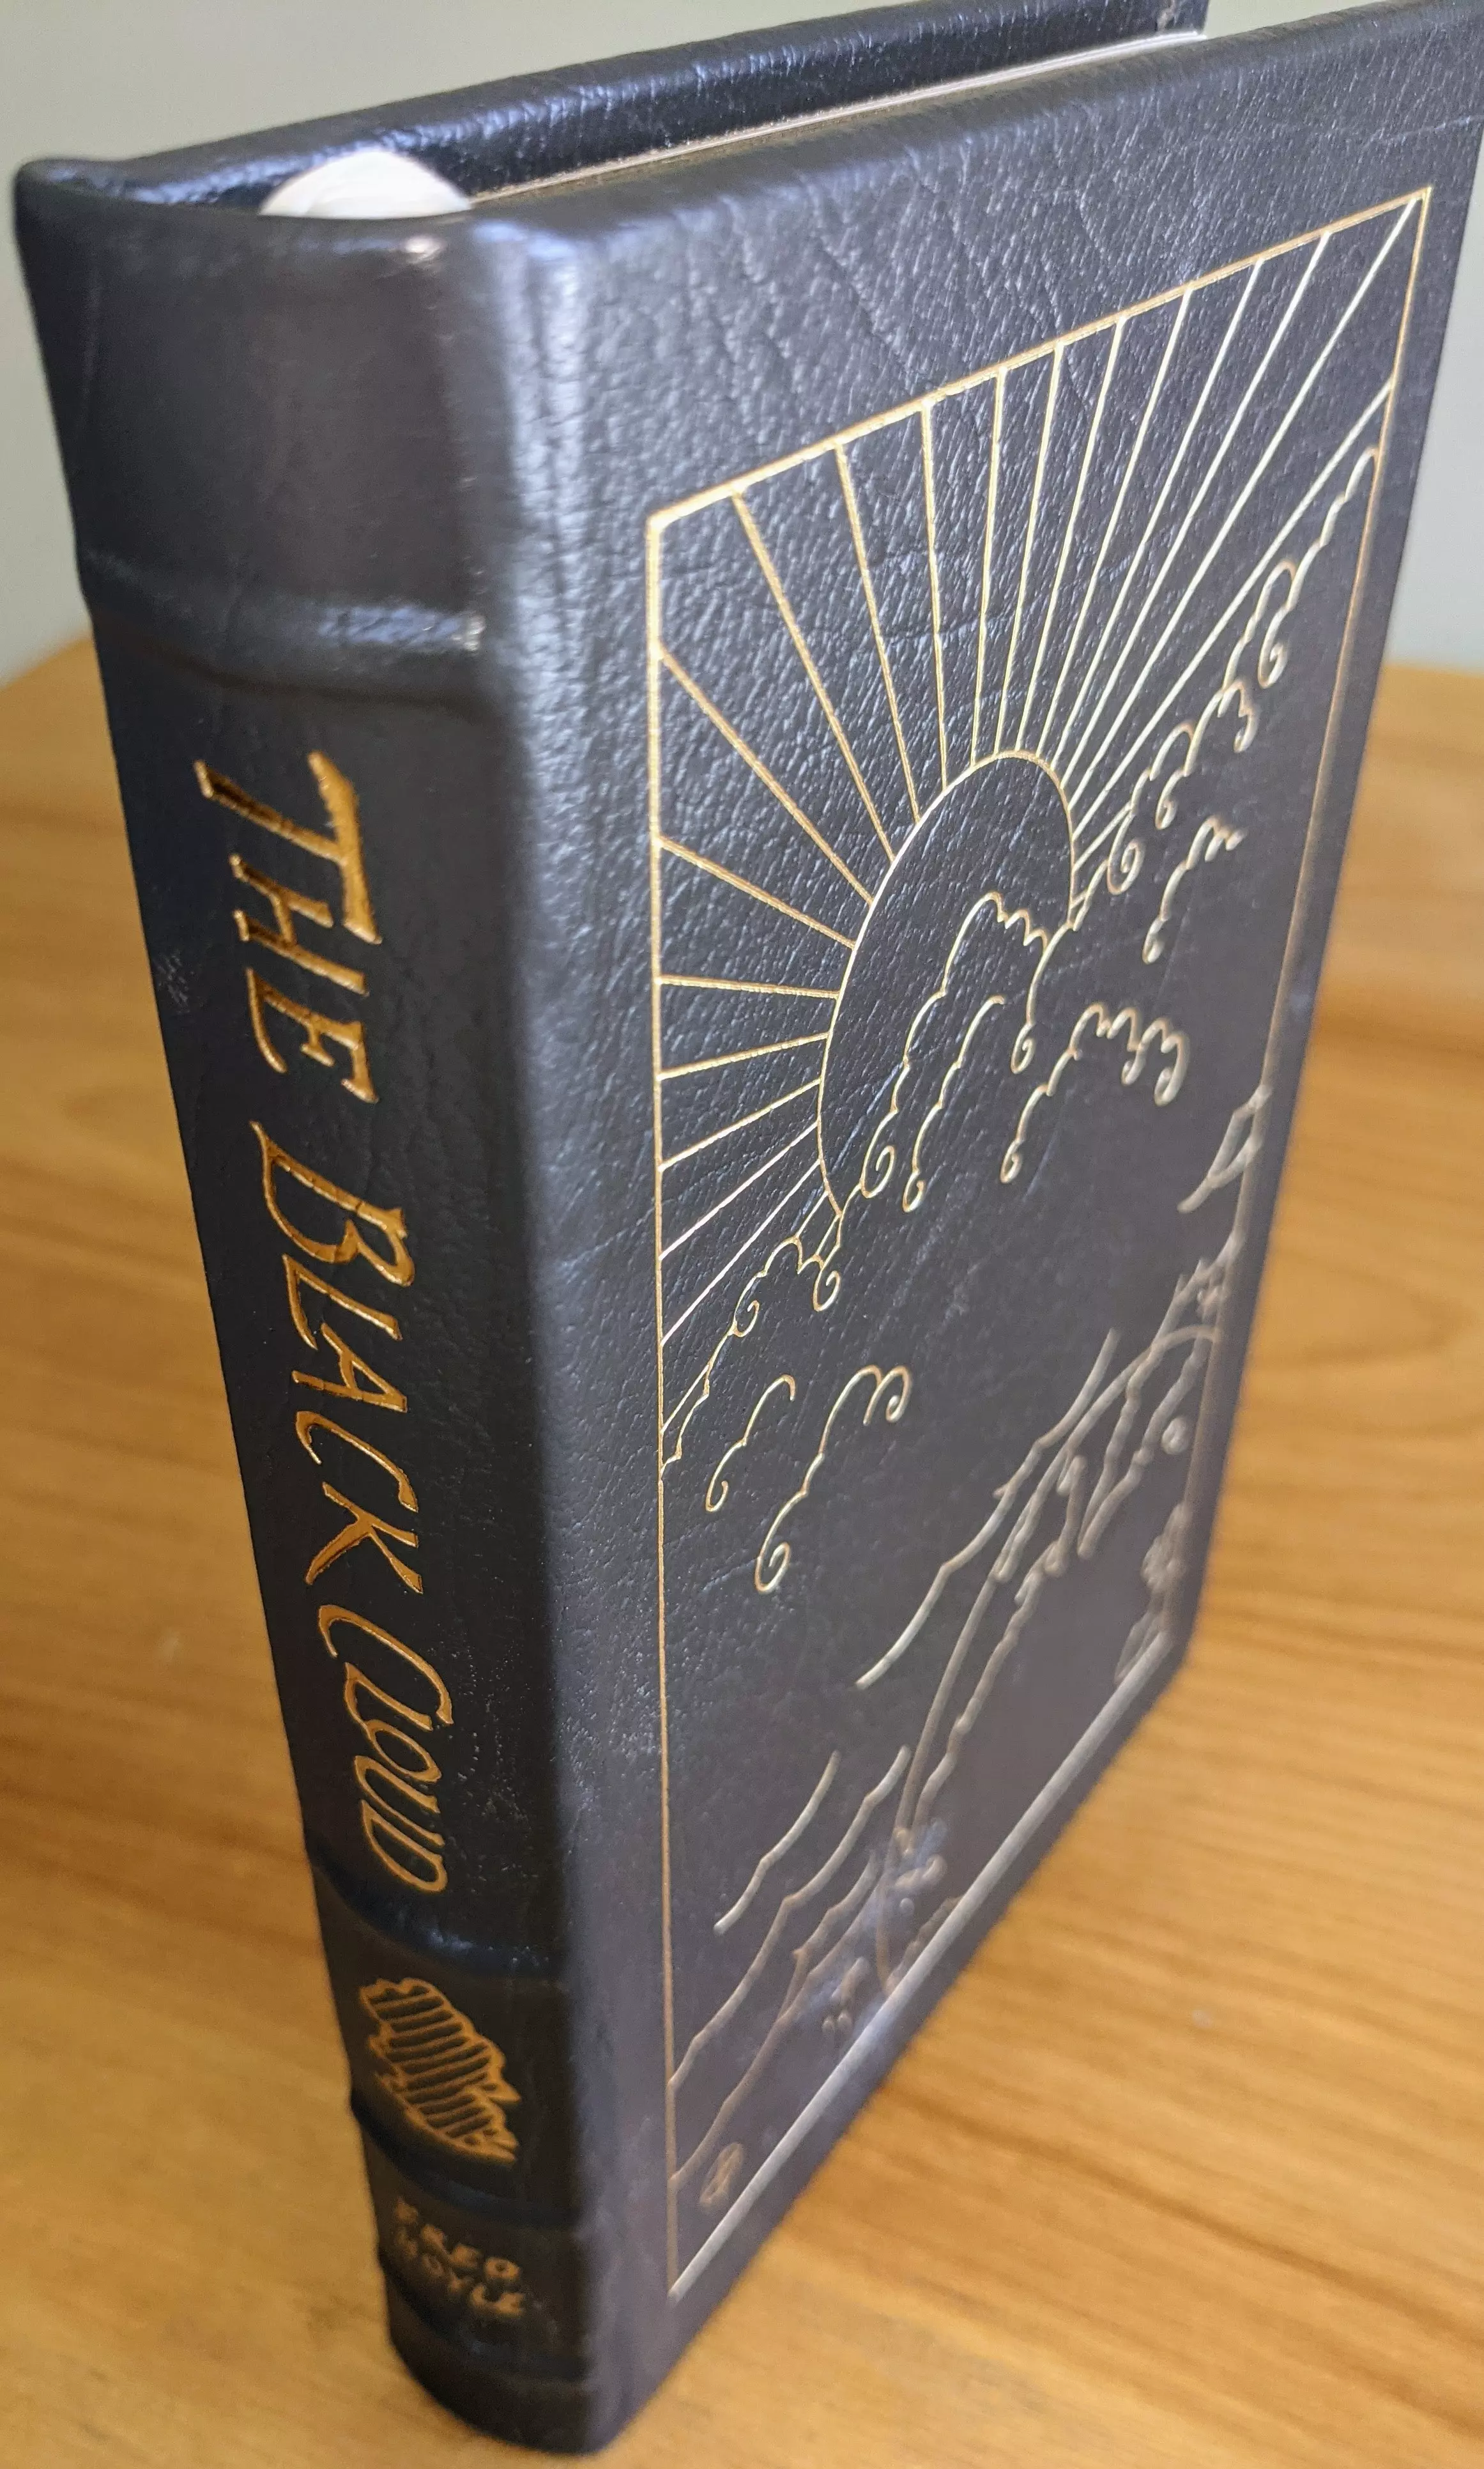 Stunning Grey Leather Bound hardback book with hubbed spine, cover artwork in 22kt gold, printed on archival paper with gold gilded edges, smyth sewing & concealed muslin joints
	  - original artwork by Unknown